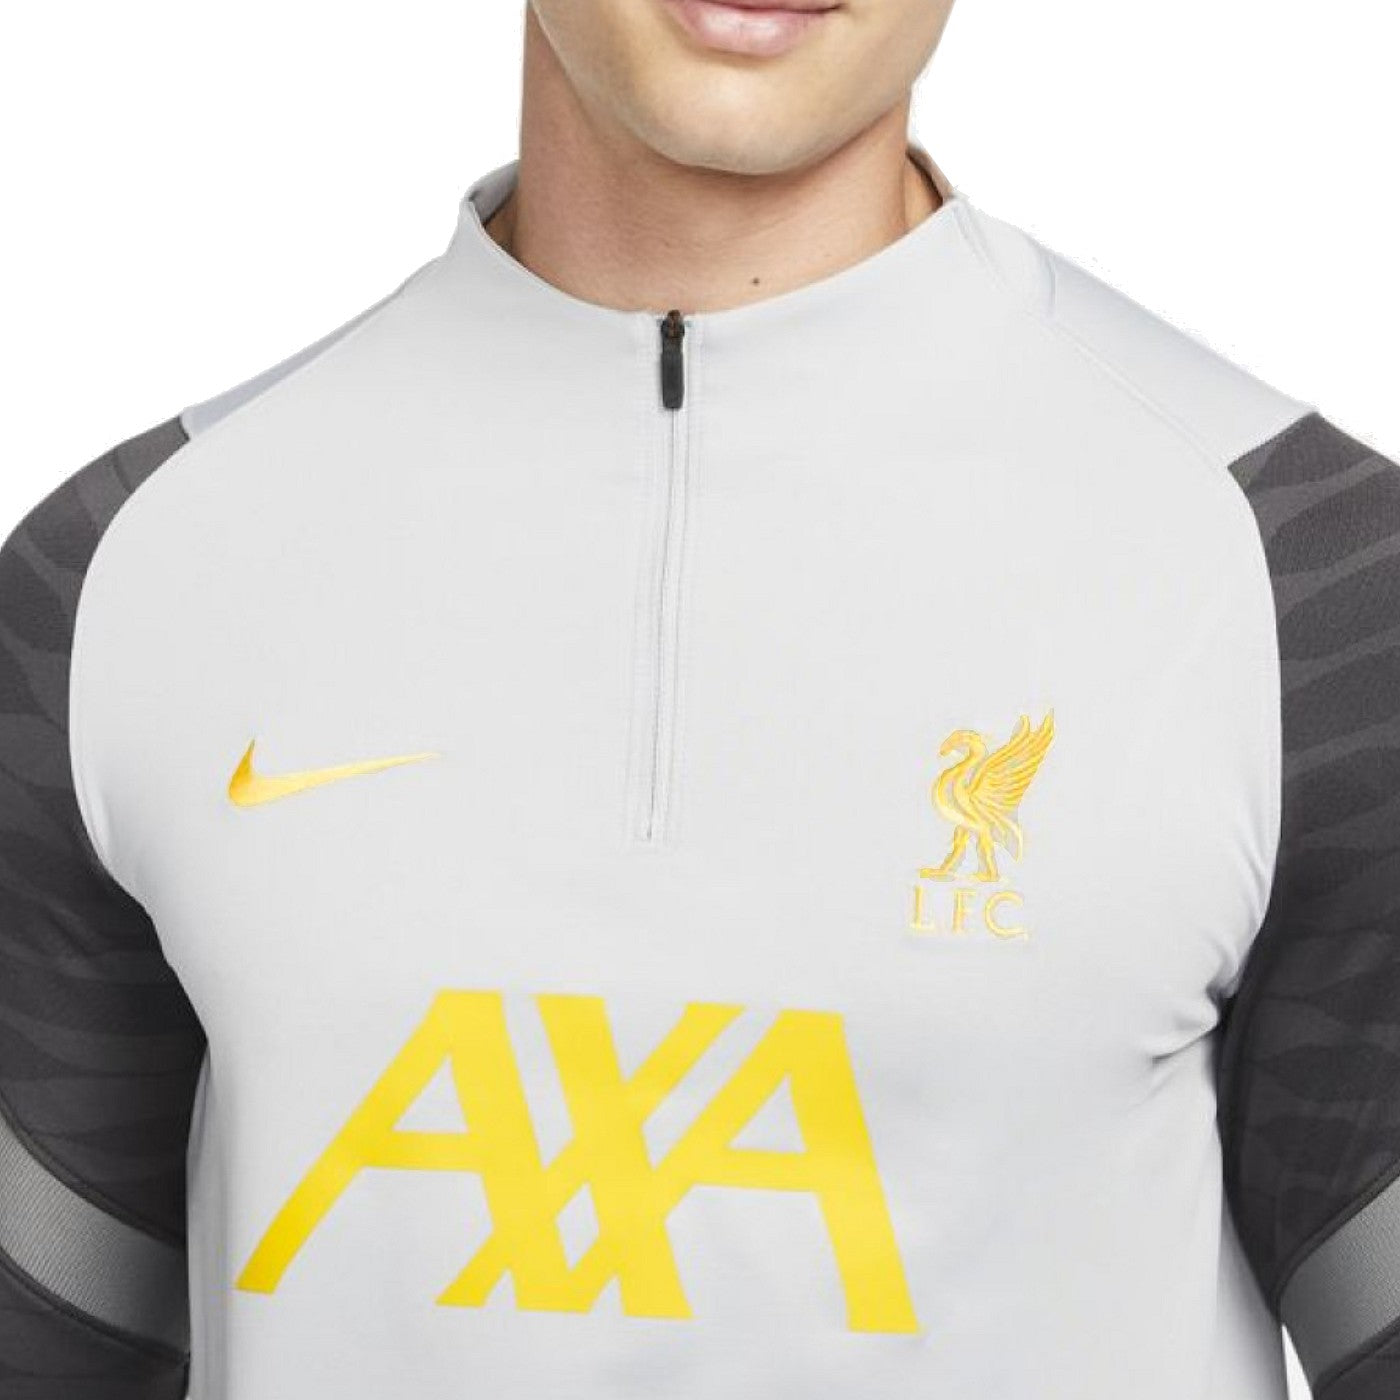 Liverpool FC Retail on X: Our 20/21 @nikefootball LFC Pre Match Top is  🔥😍 Explore the full Training Kit Collection in-store and online at   #LFC #LiverpoolFC  / X